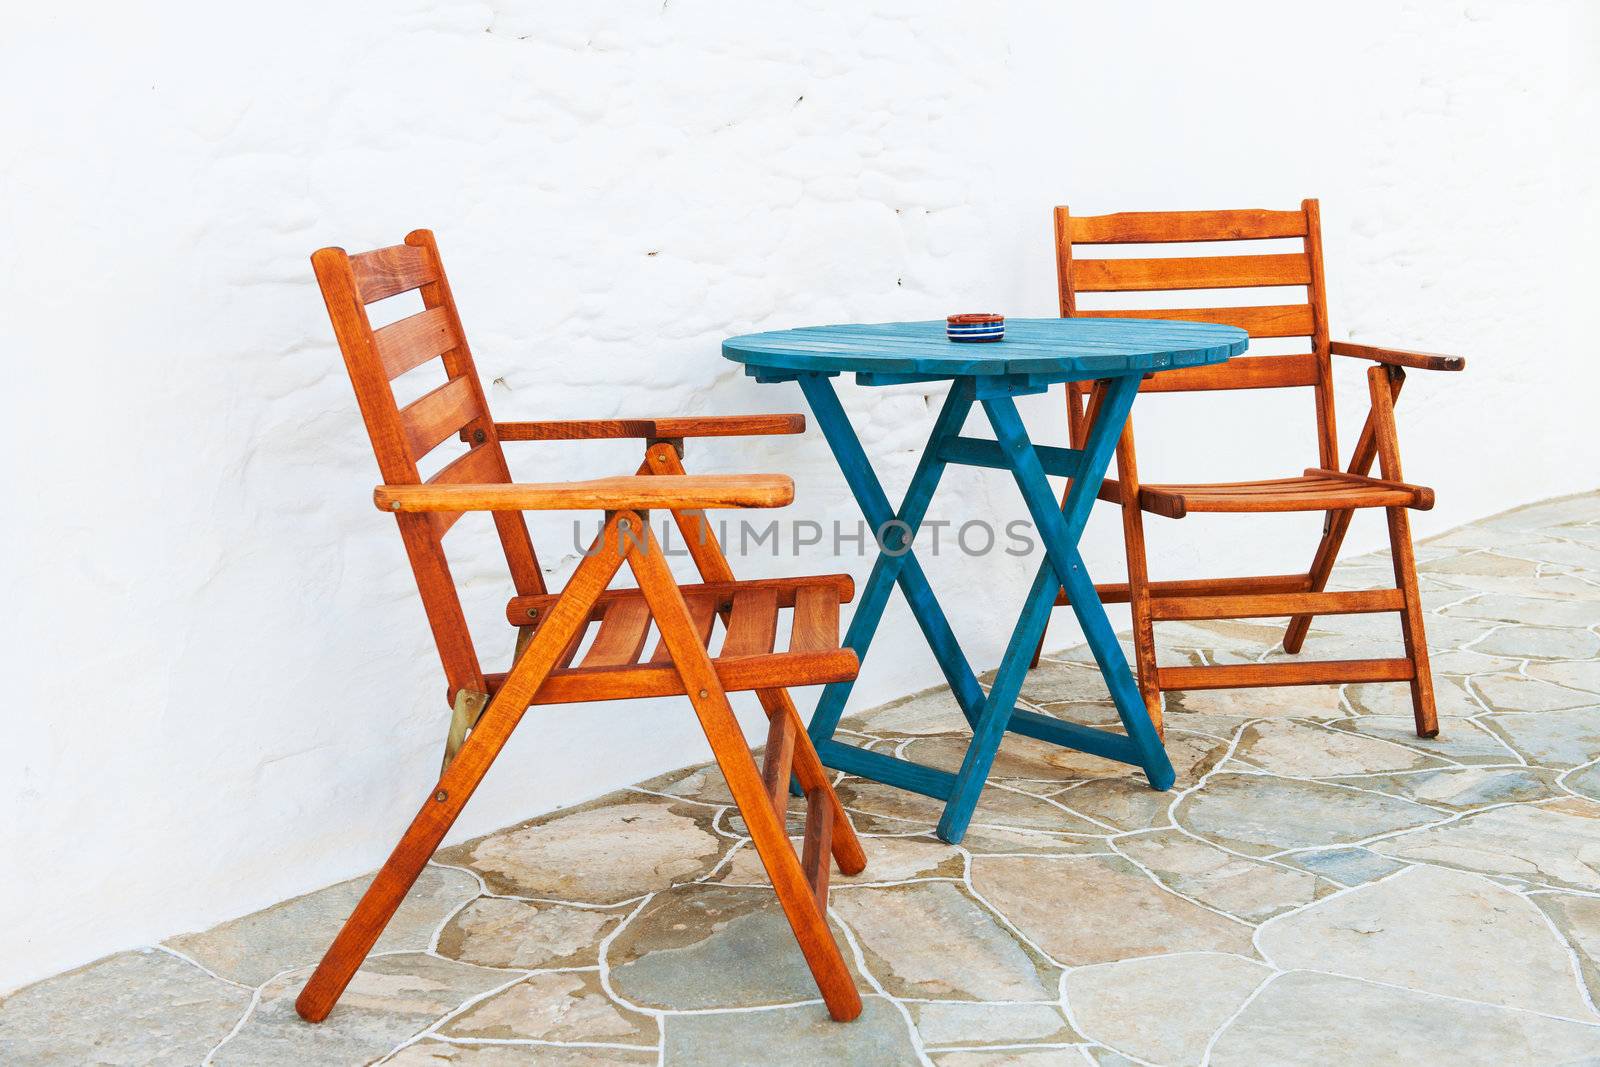 Colorful wooden chair and table arrangement from a Greek island alleyway